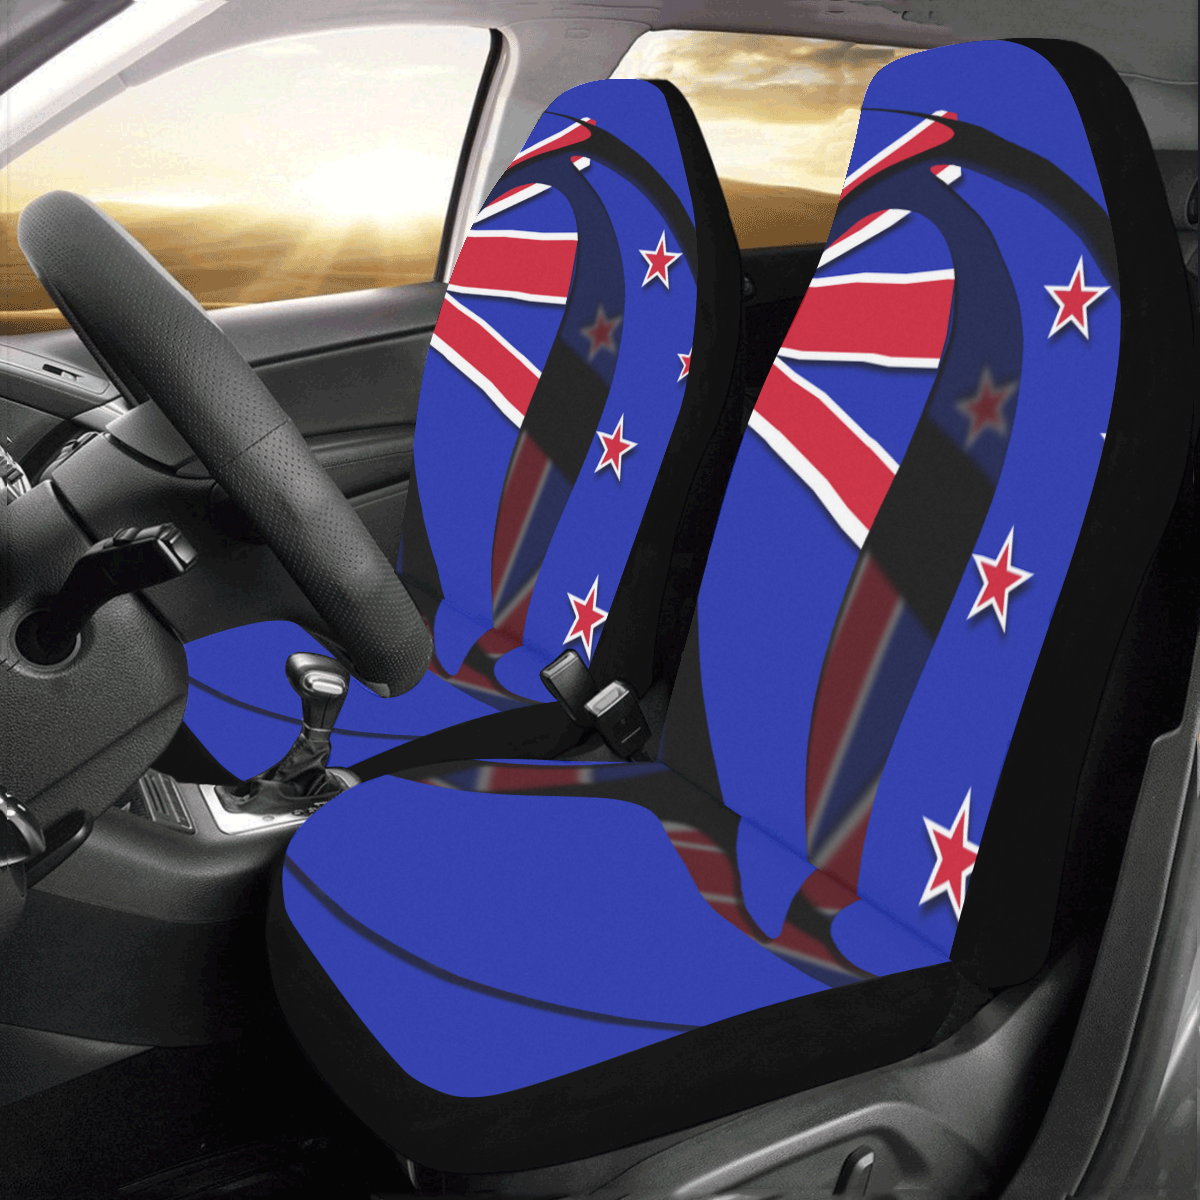 The Flag of New Zealand Car Seat Covers (Set of 2)